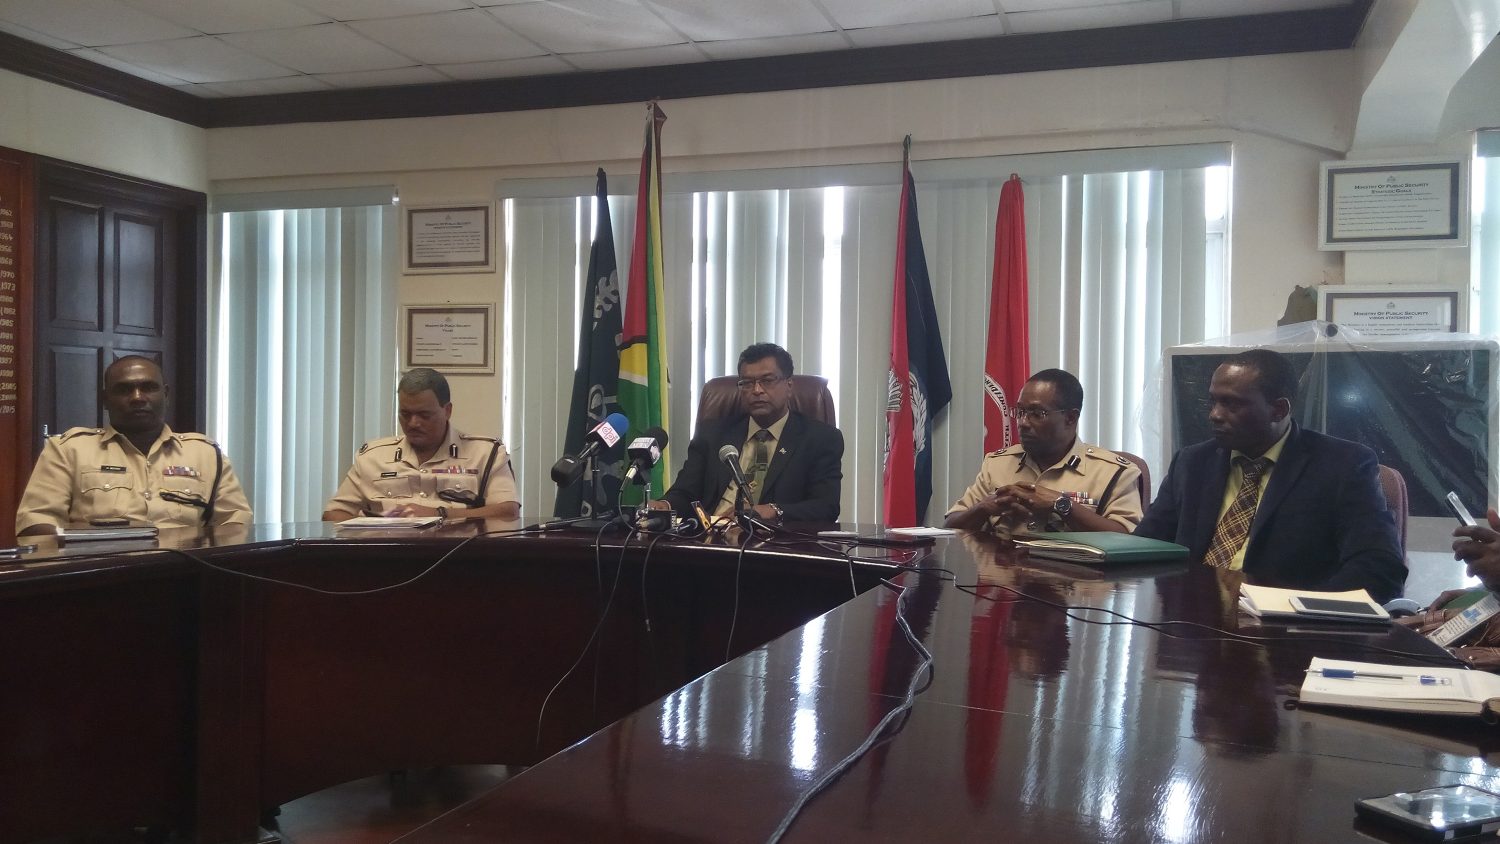 Minister of Public Security Khemraj Ramjattan (centre) addressing reporters yesterday. Seated with him are (from left) Traffic Chief Dion Moore, acting Police Commissioner David Ramnarine, Head of Operations Assistant Commissioner Clifton Hicken and acting Crime Chief Assistant Commissioner Paul Williams.
